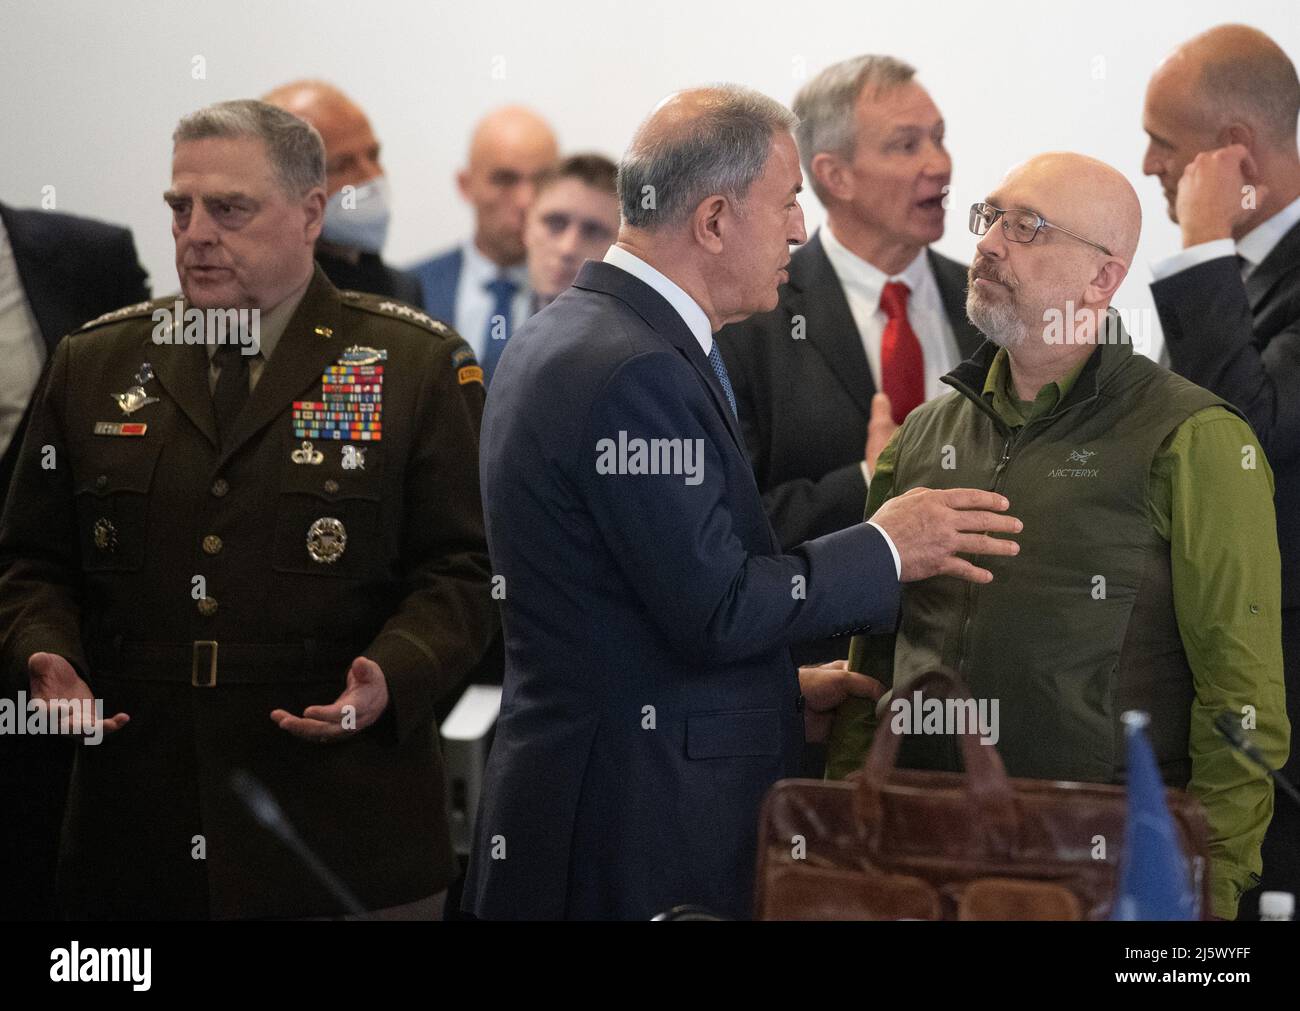 Ramstein, Germany. 26th Apr, 2022. Oleksiy Resnikov (r), defense minister of Ukraine, greets Hulusi Akar (m), defense minister of Turkey, while Mark A. Milley (l), U.S. chief of staff, stands next to him and gestures. Credit: Boris Roessler/dpa/Alamy Live News Stock Photo